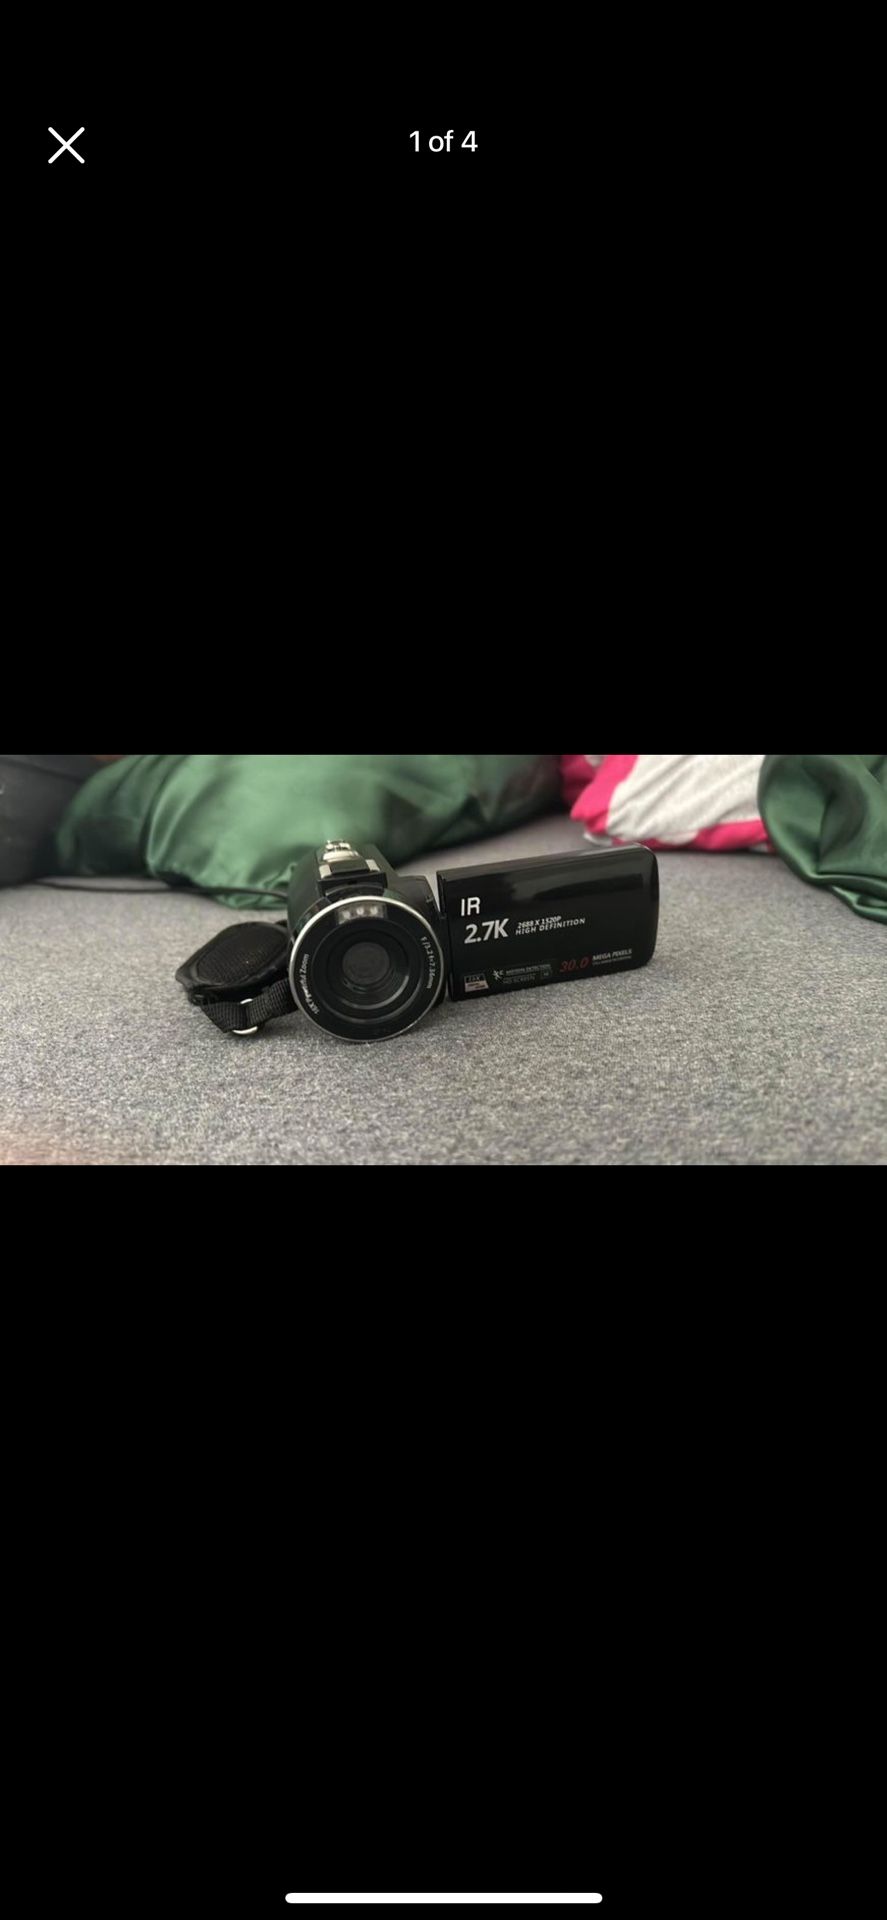 2.7k High Defintion Camera (SD Card And Battery Included)